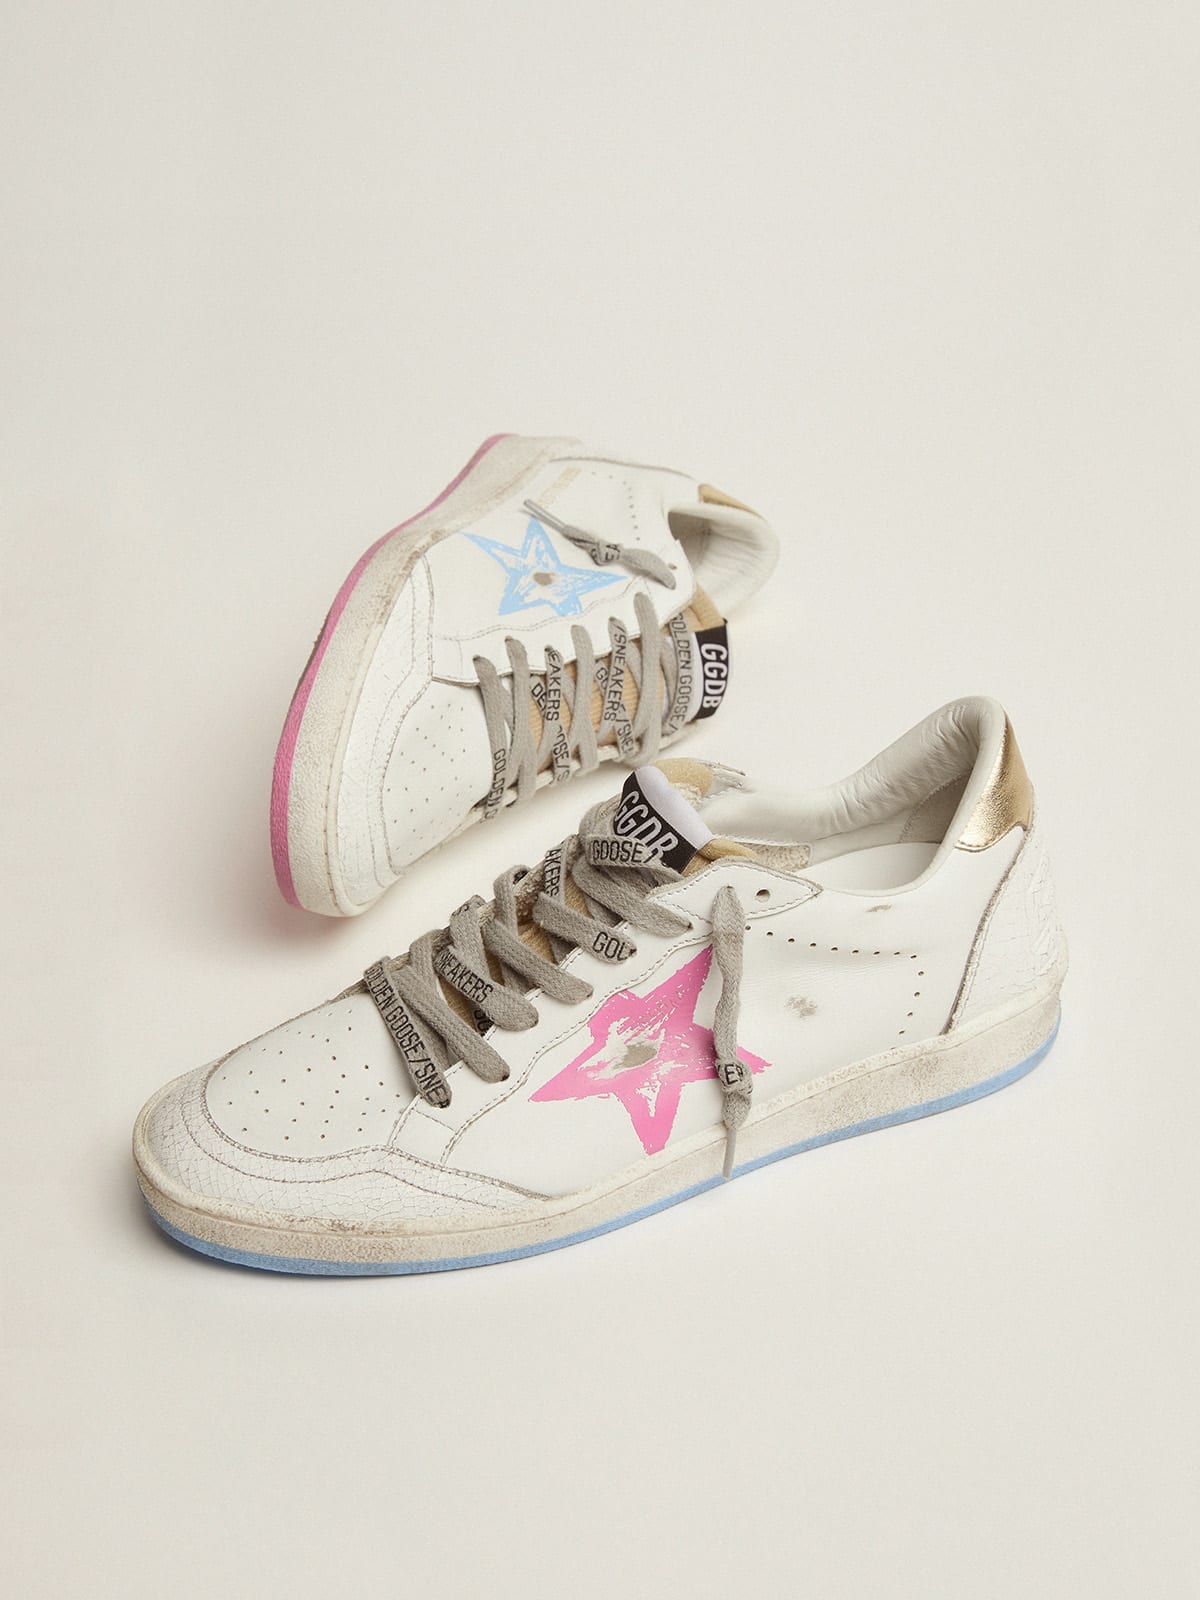 Ball Star sneakers with gold heel tab and foam rubber tongue | Golden Goose